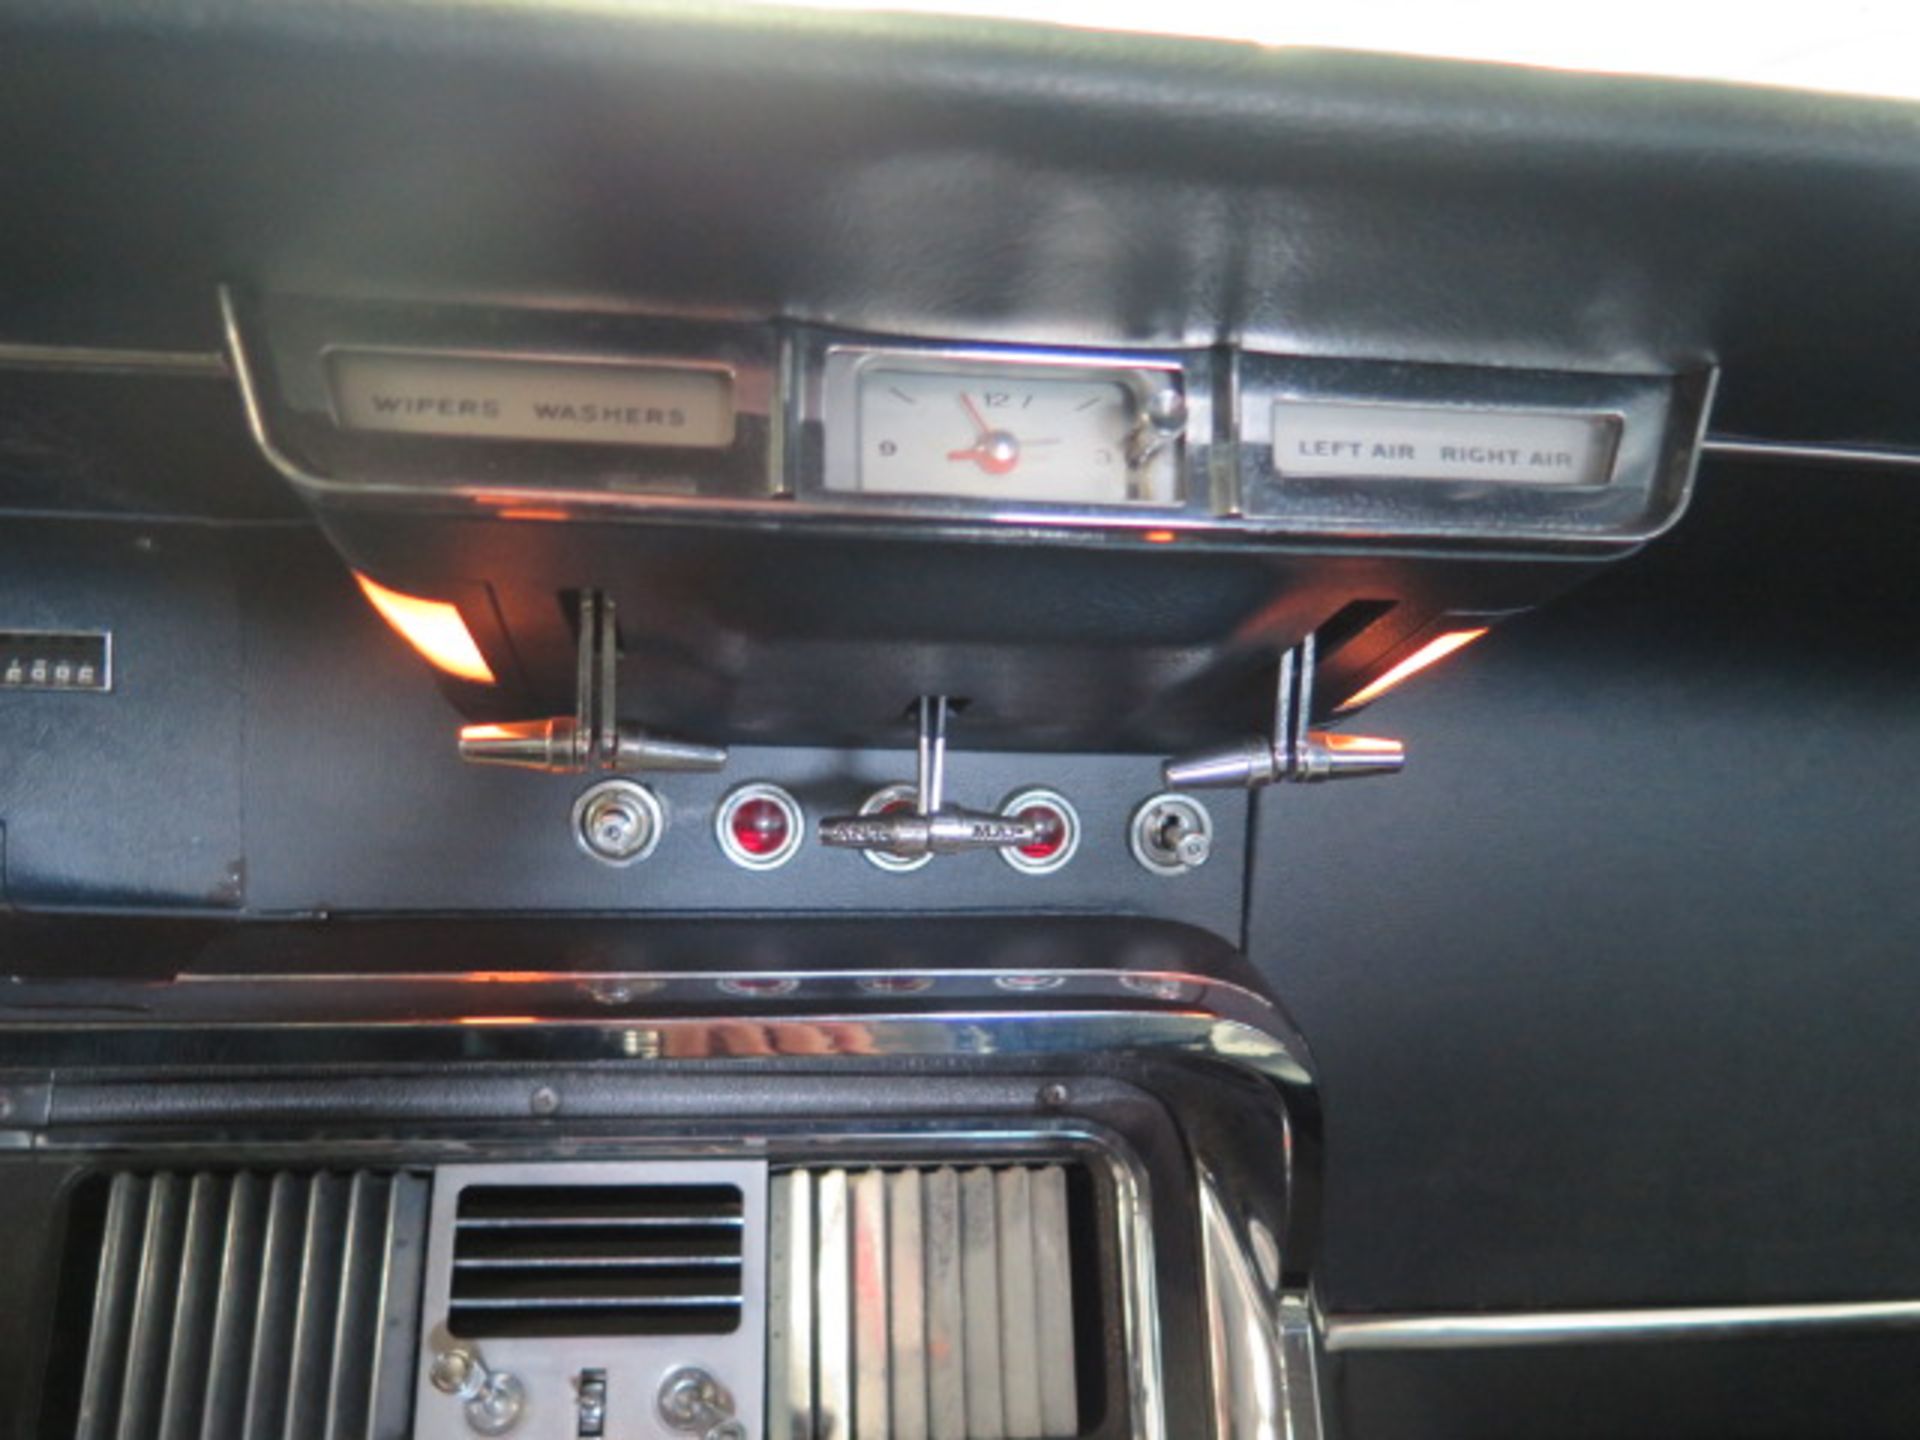 1966 Ford Thunderbird Convertible w/ “Q” Designation V8 428 CID 4 Barrel Carb Gas, SOLD AS IS - Image 39 of 46